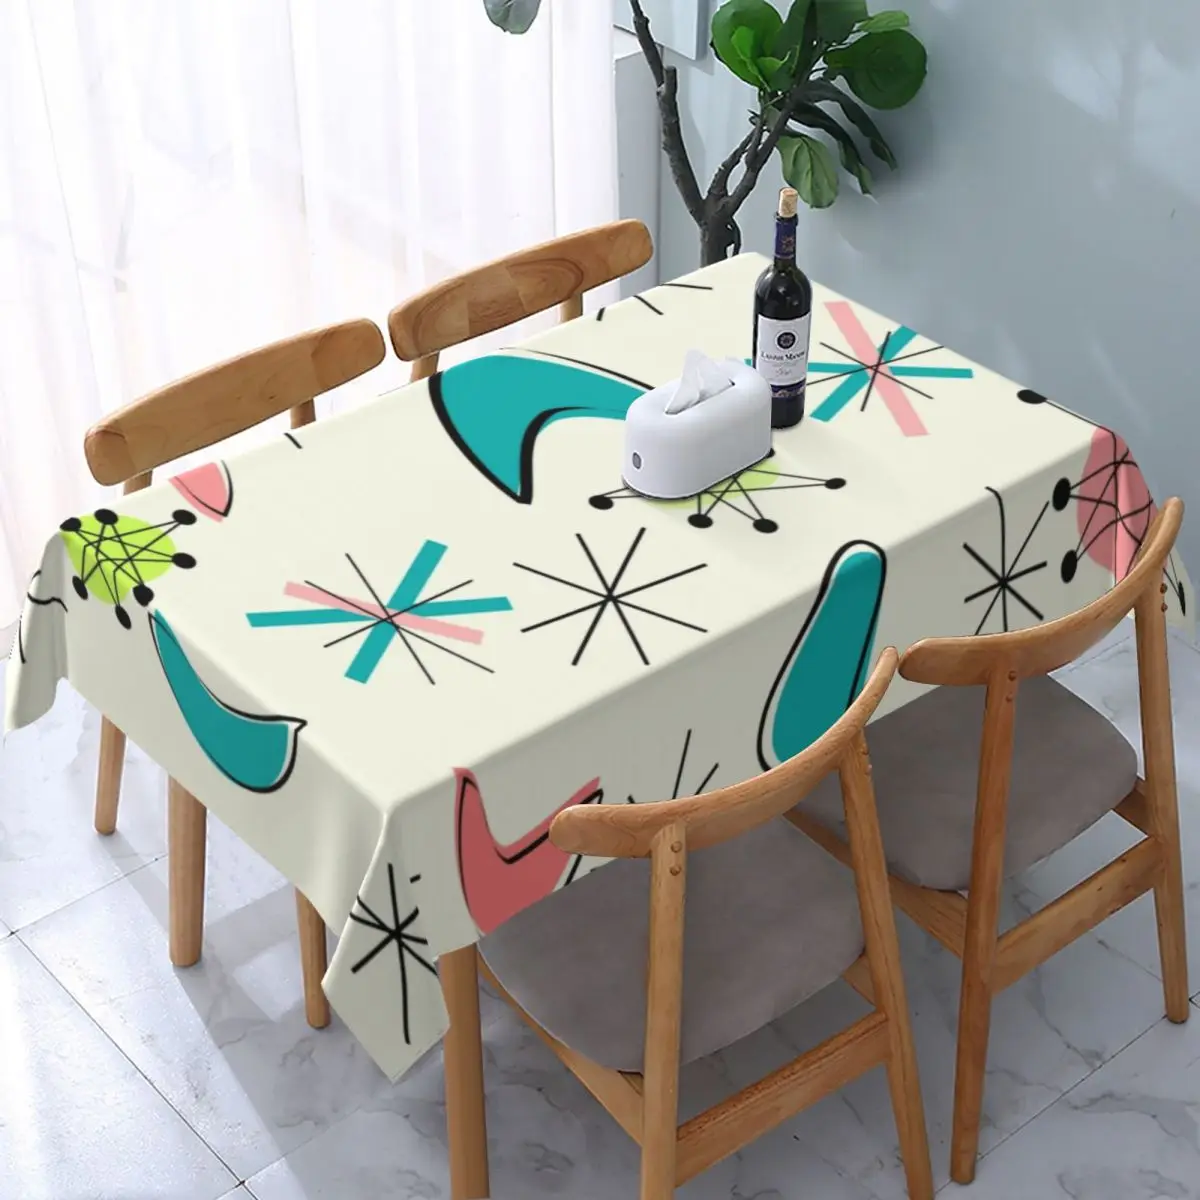 

Waterproof Minimalist Mid Century Atomic Age Inspired Table Cover Geometric Table Cloth Backing Edge Tablecloth for Dining